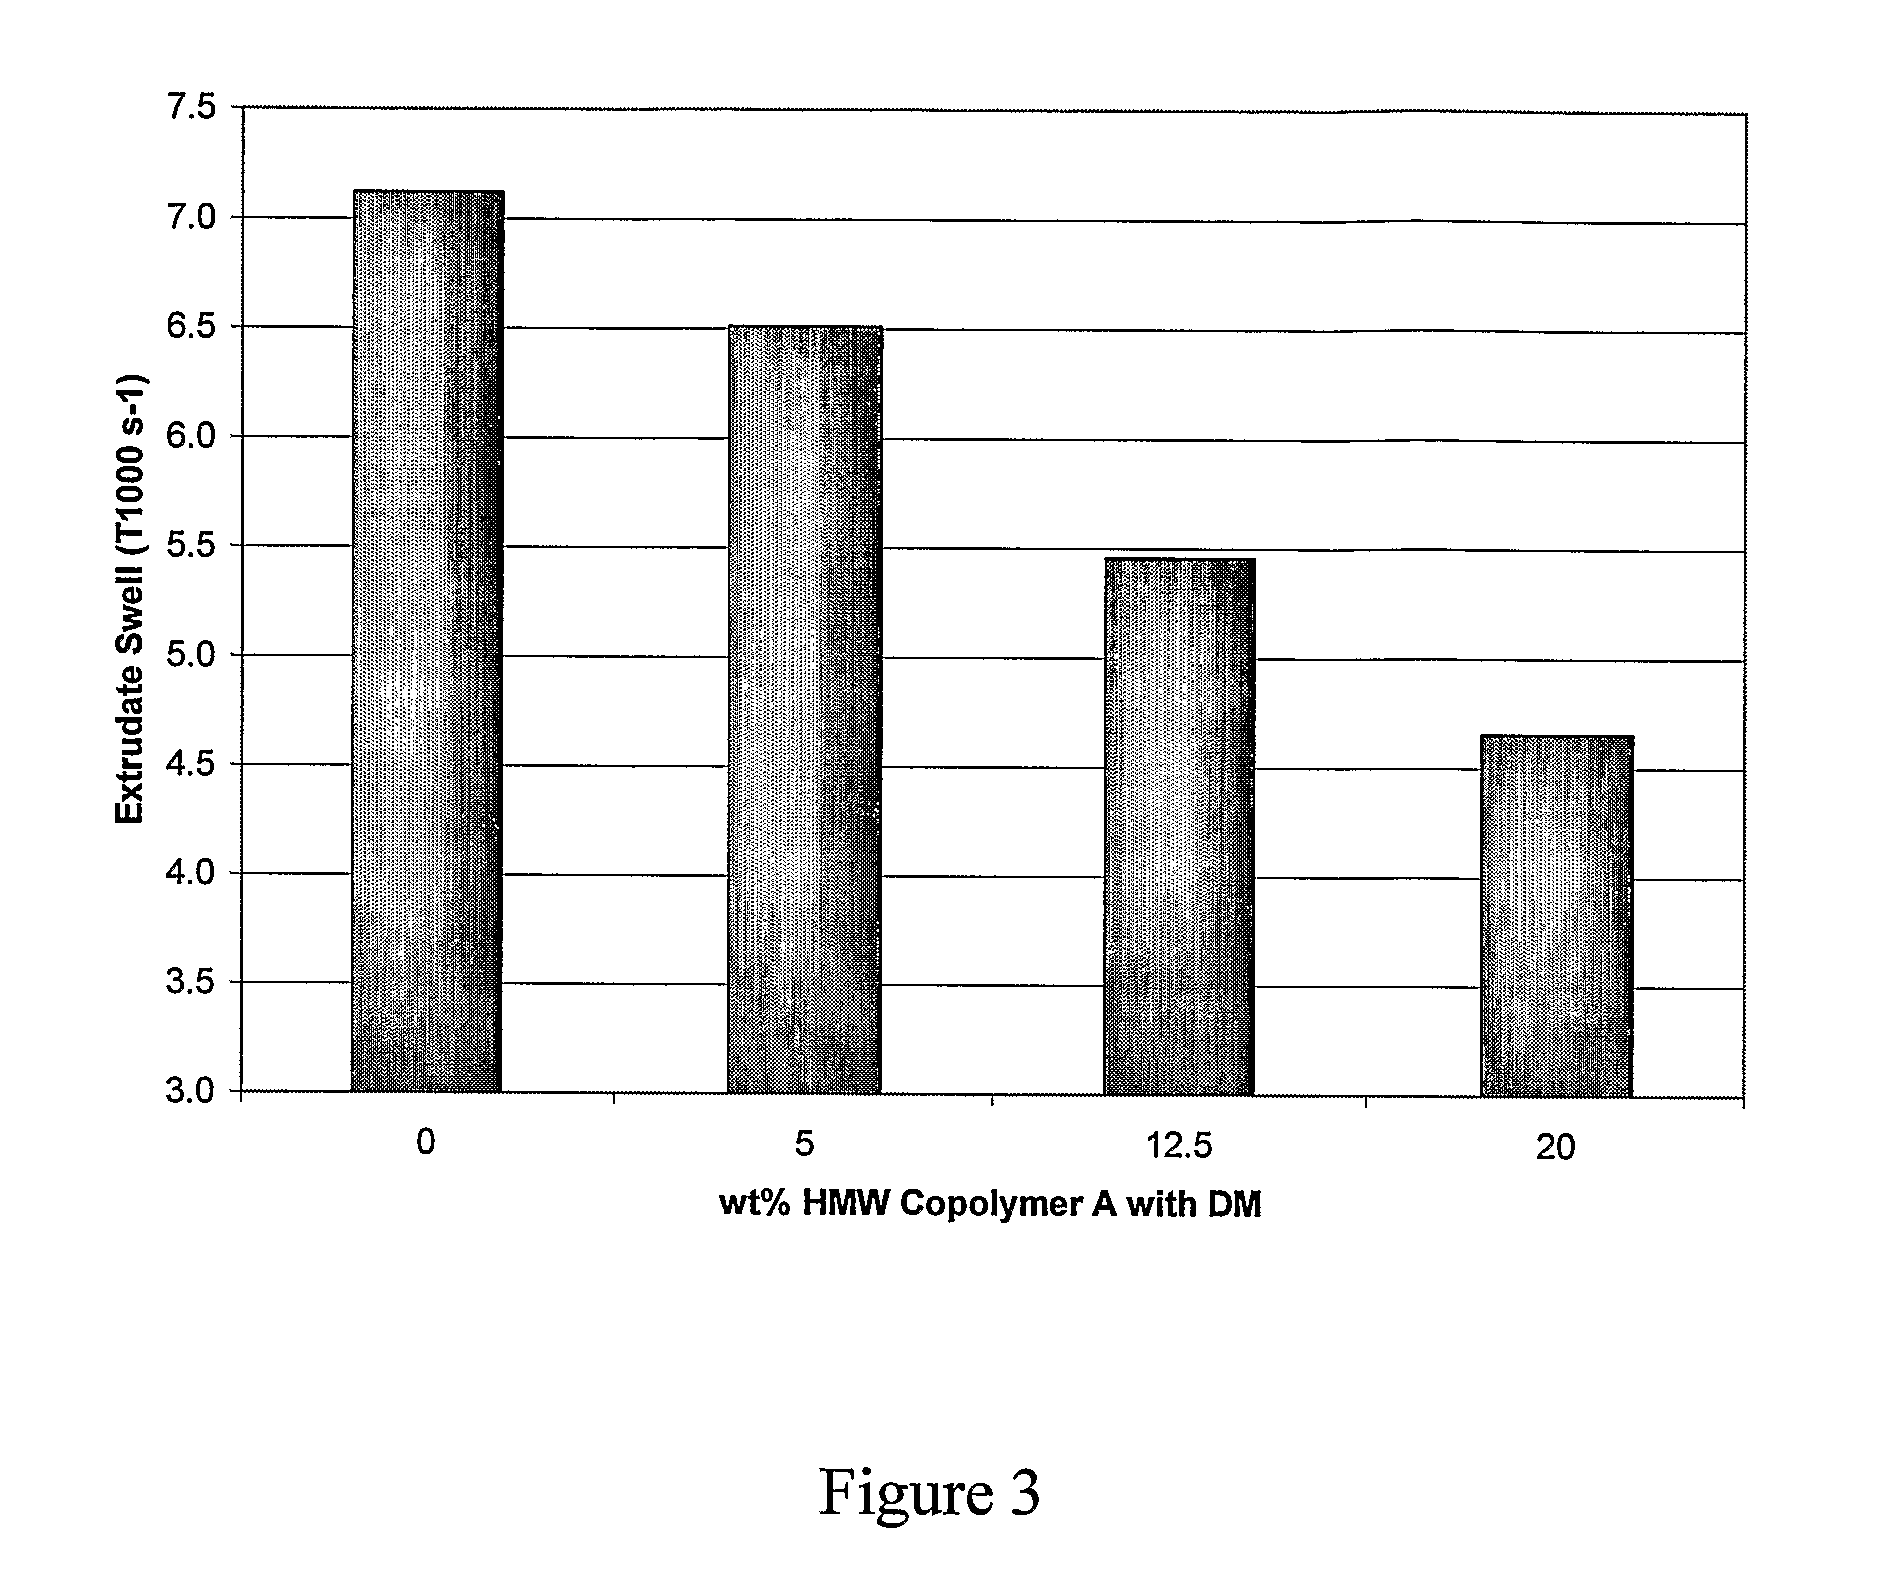 Polyolefin compositions, articles made therefrom and methods for preparing the same